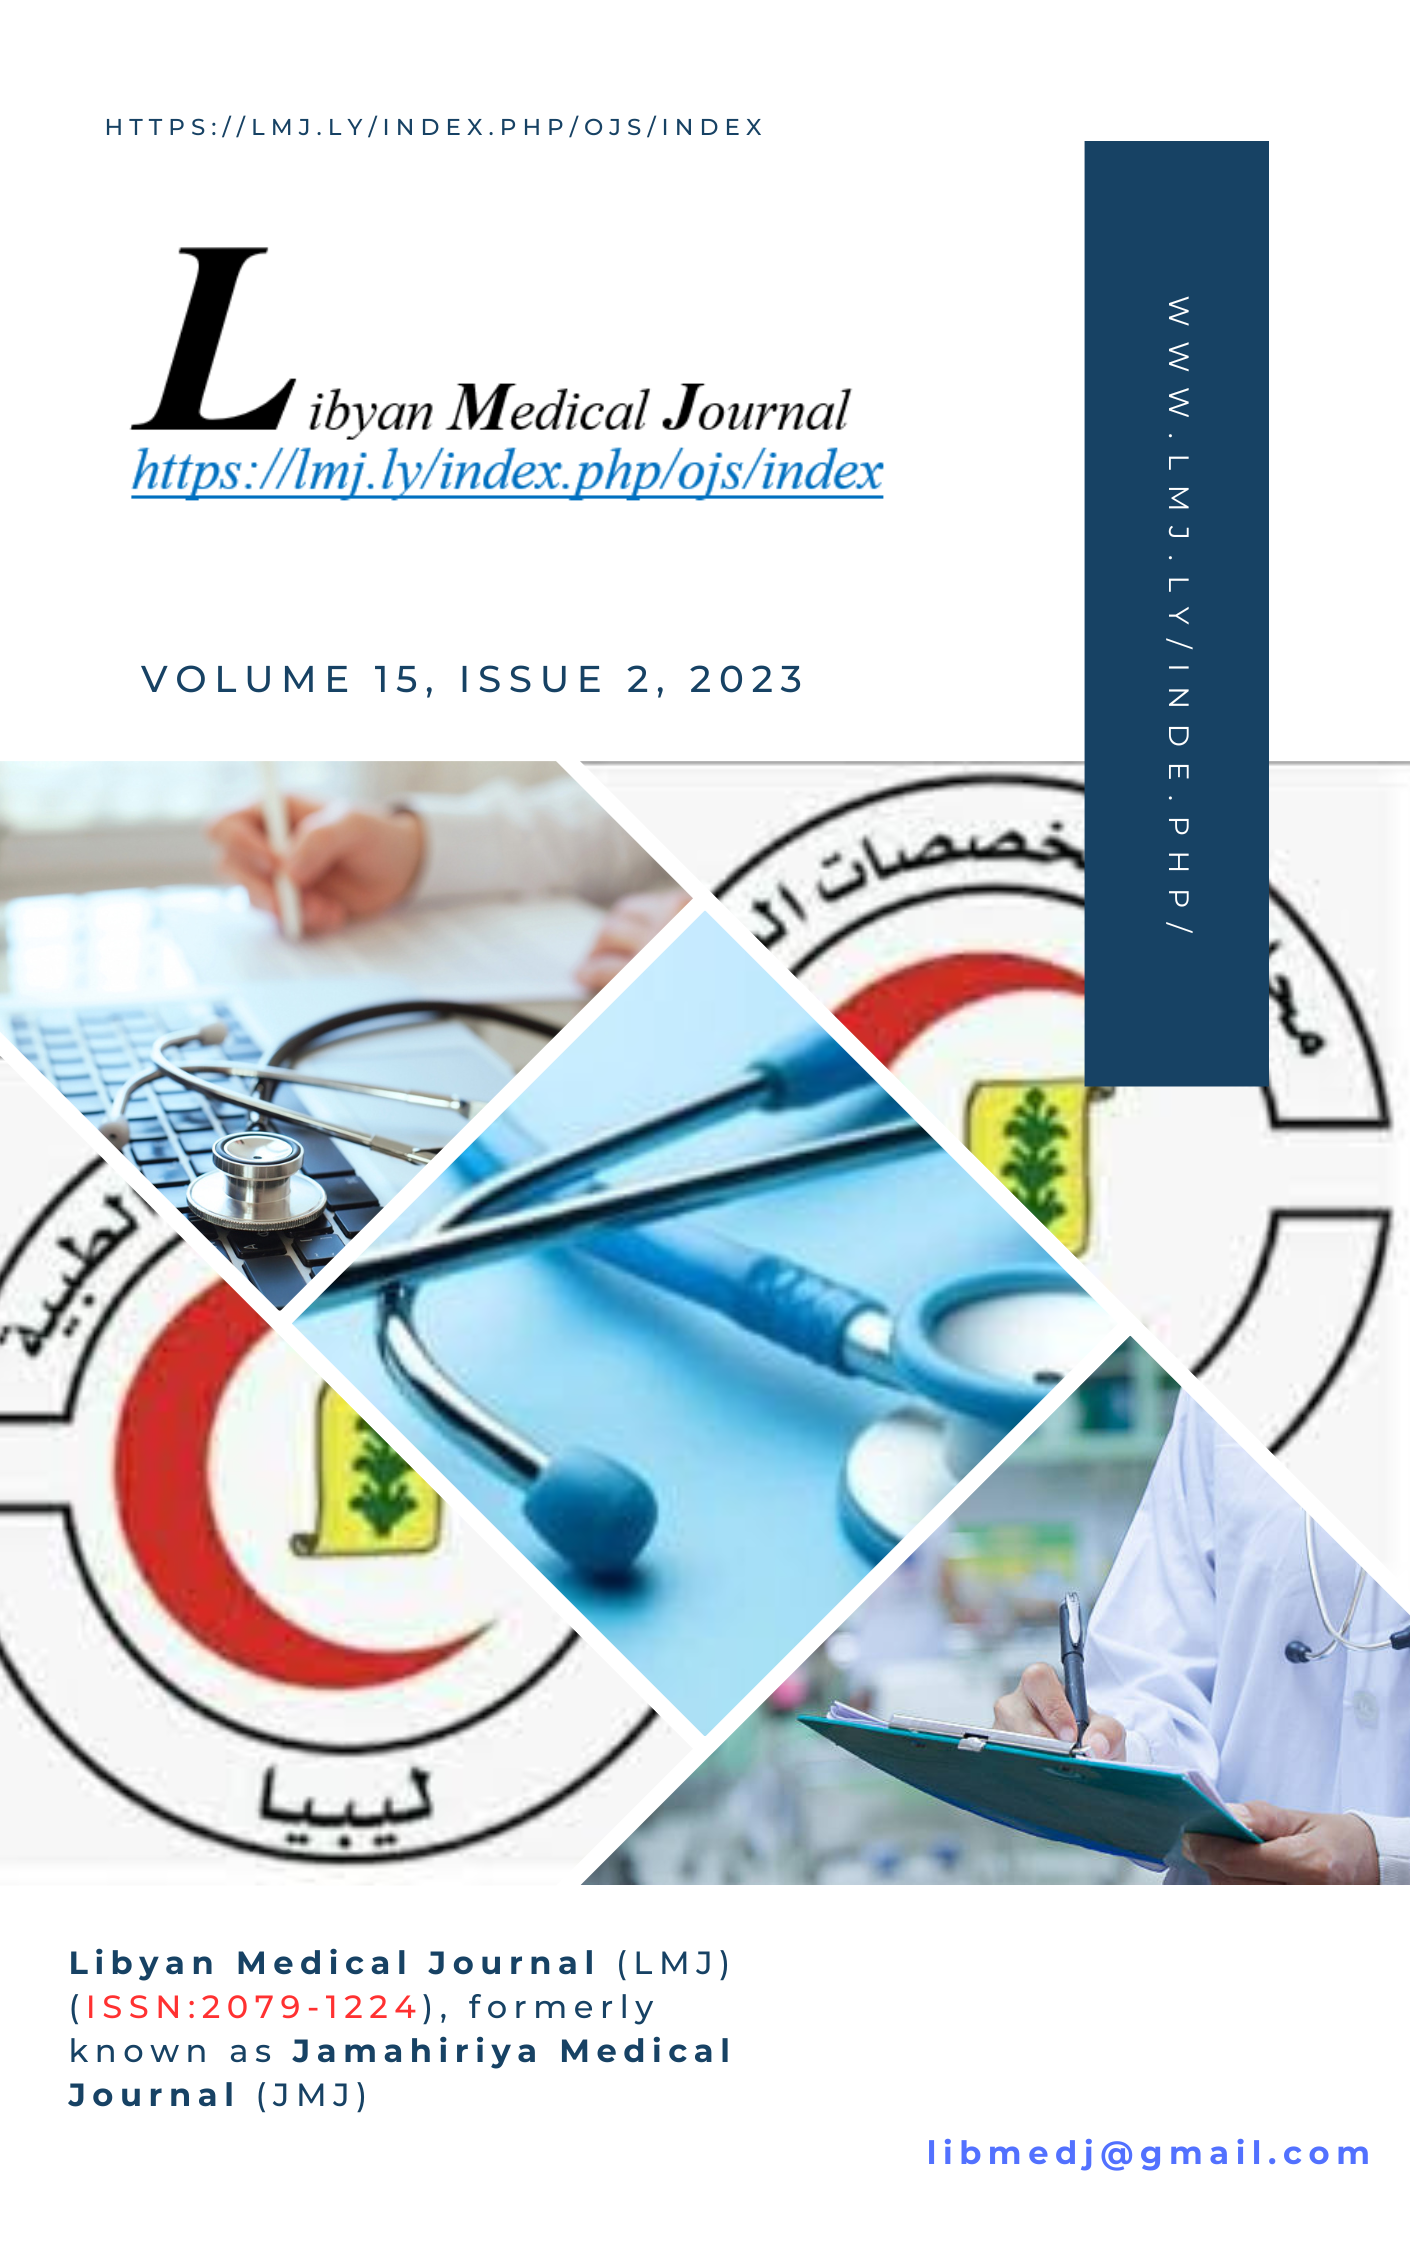 					View Volume 15, Issue 2, 2023
				